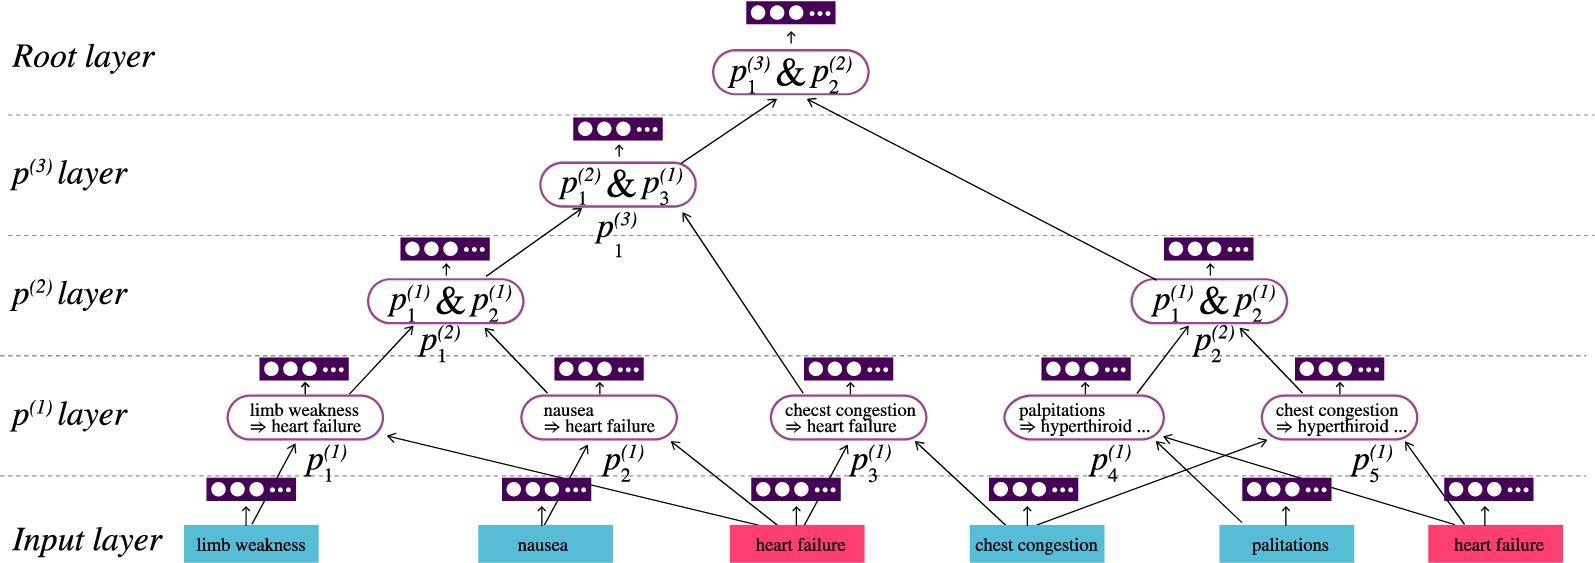 Type 4 compiled. Huffman tree of the recursive neural knowledge network (RNKN), representing deep first-order logic knowledge. The first layer of the tree consists of entities, the second layer consists of relations (x→y). Higher layers compute logic rules. The root node is the final embedding representing a document (in this case a single health record). Back propagation is used for optimization with softmax for calculating class probabilities [75].